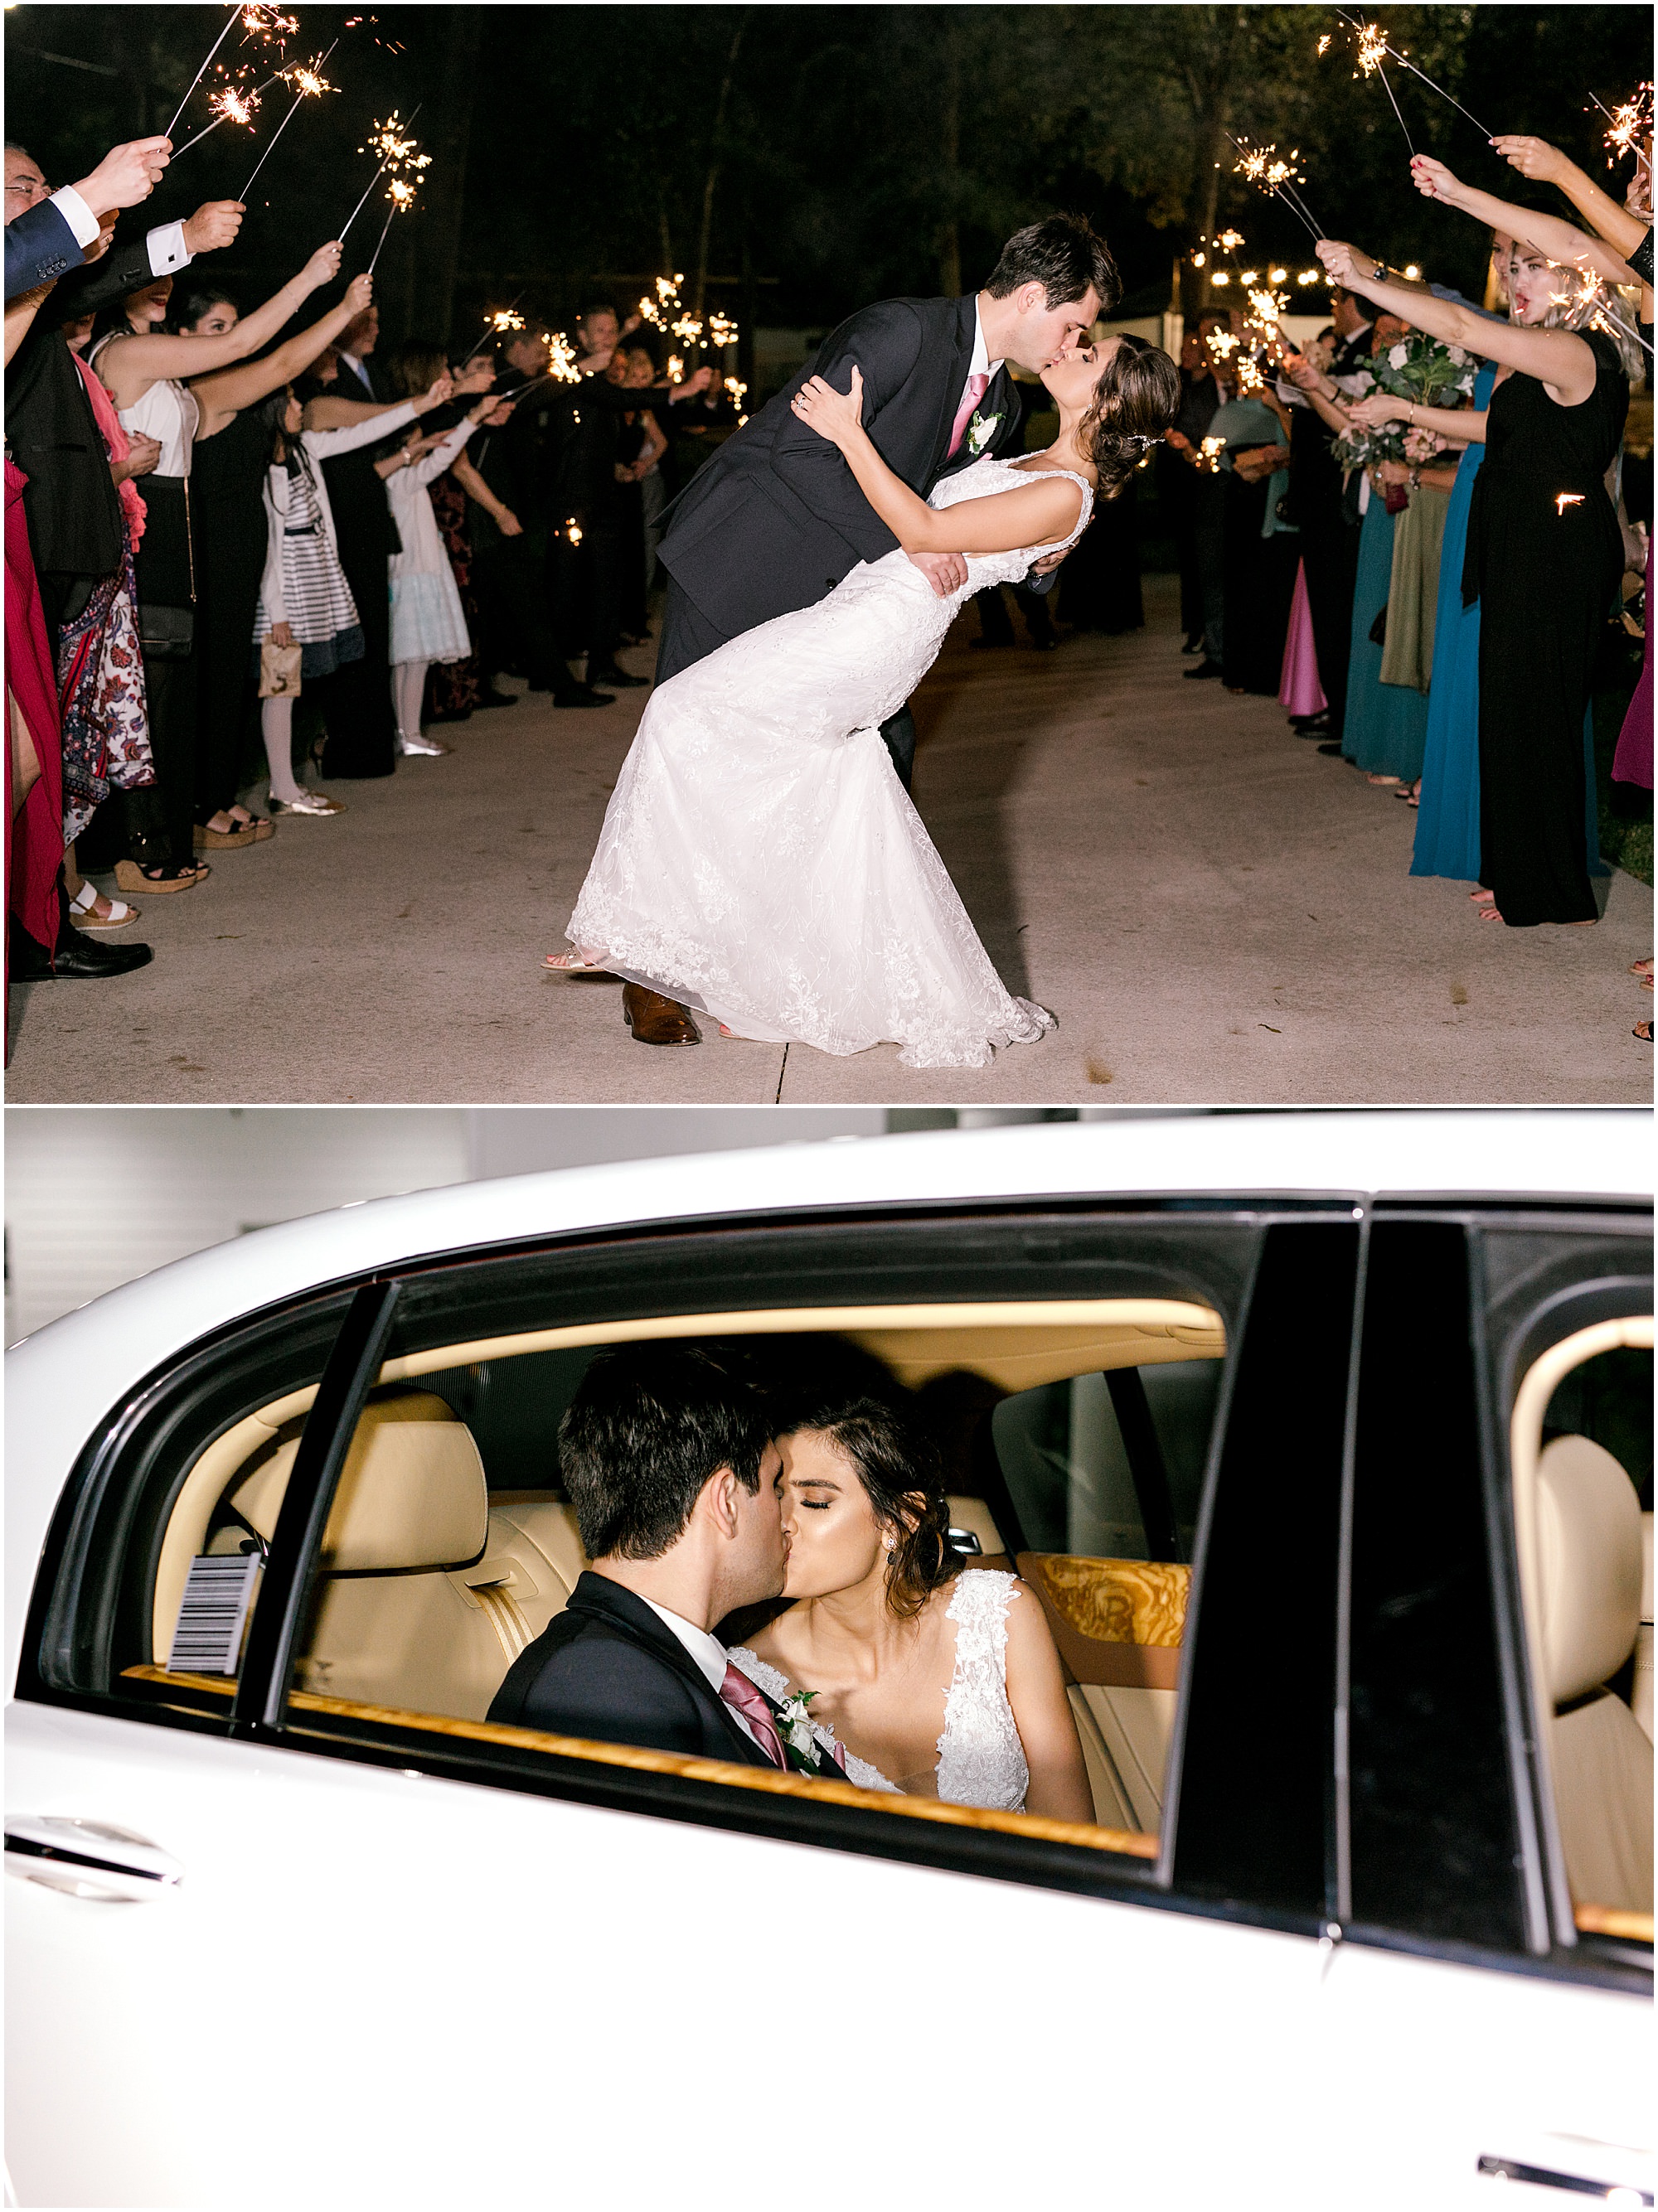 Bride and groom led out of dreamy southern wedding by a sparkler exit and share a kiss in a white Bentley.